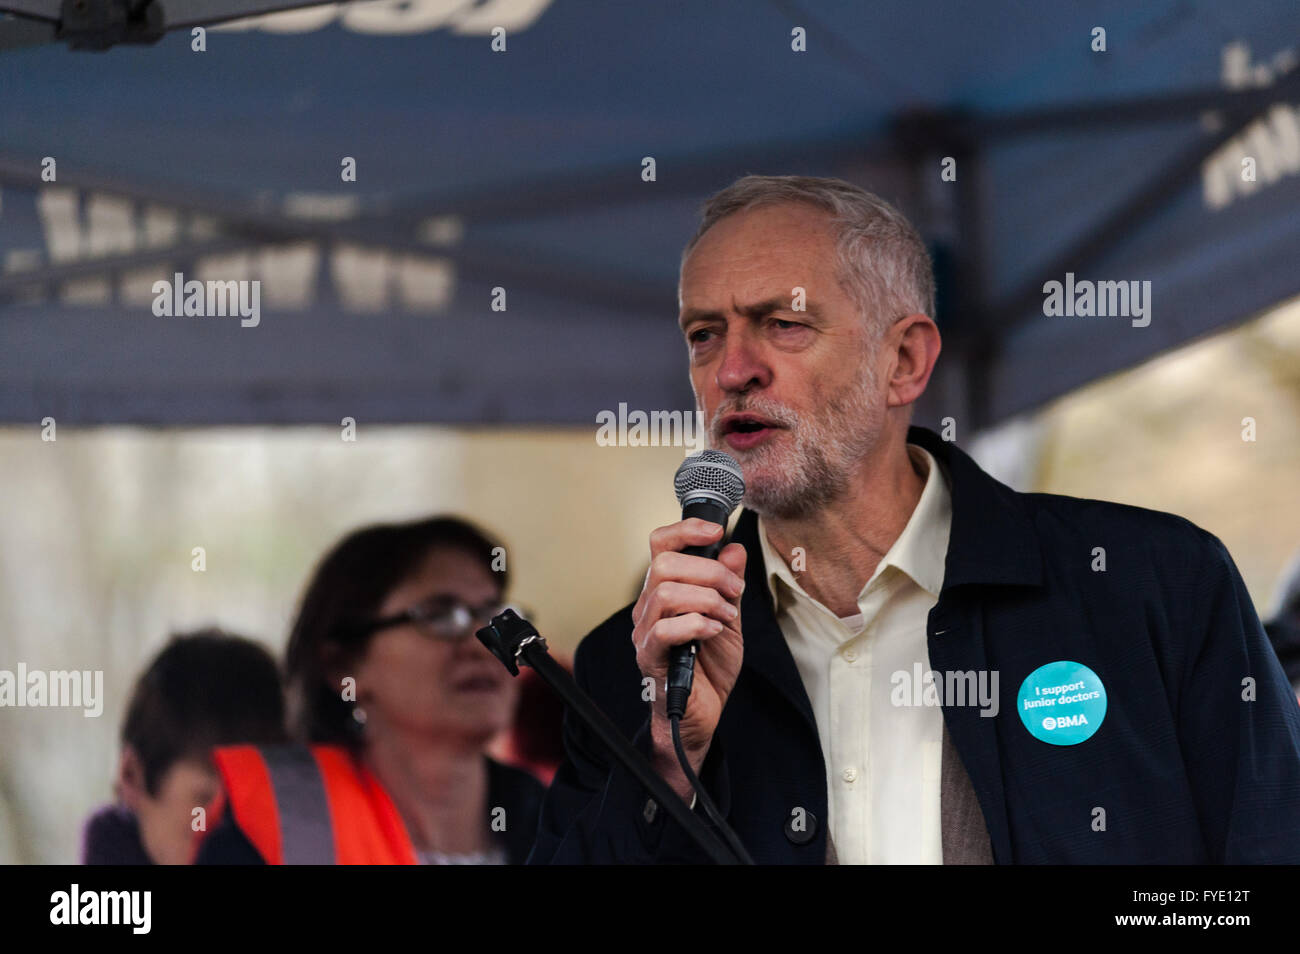 London, UK. 26th April 2016. Jeremy Corbyn, the leader of the Labour Party makes a speech during the junior doctors' strike against the government's imposition of a new contract. Wiktor Szymanowicz/Alamy Live News Stock Photo